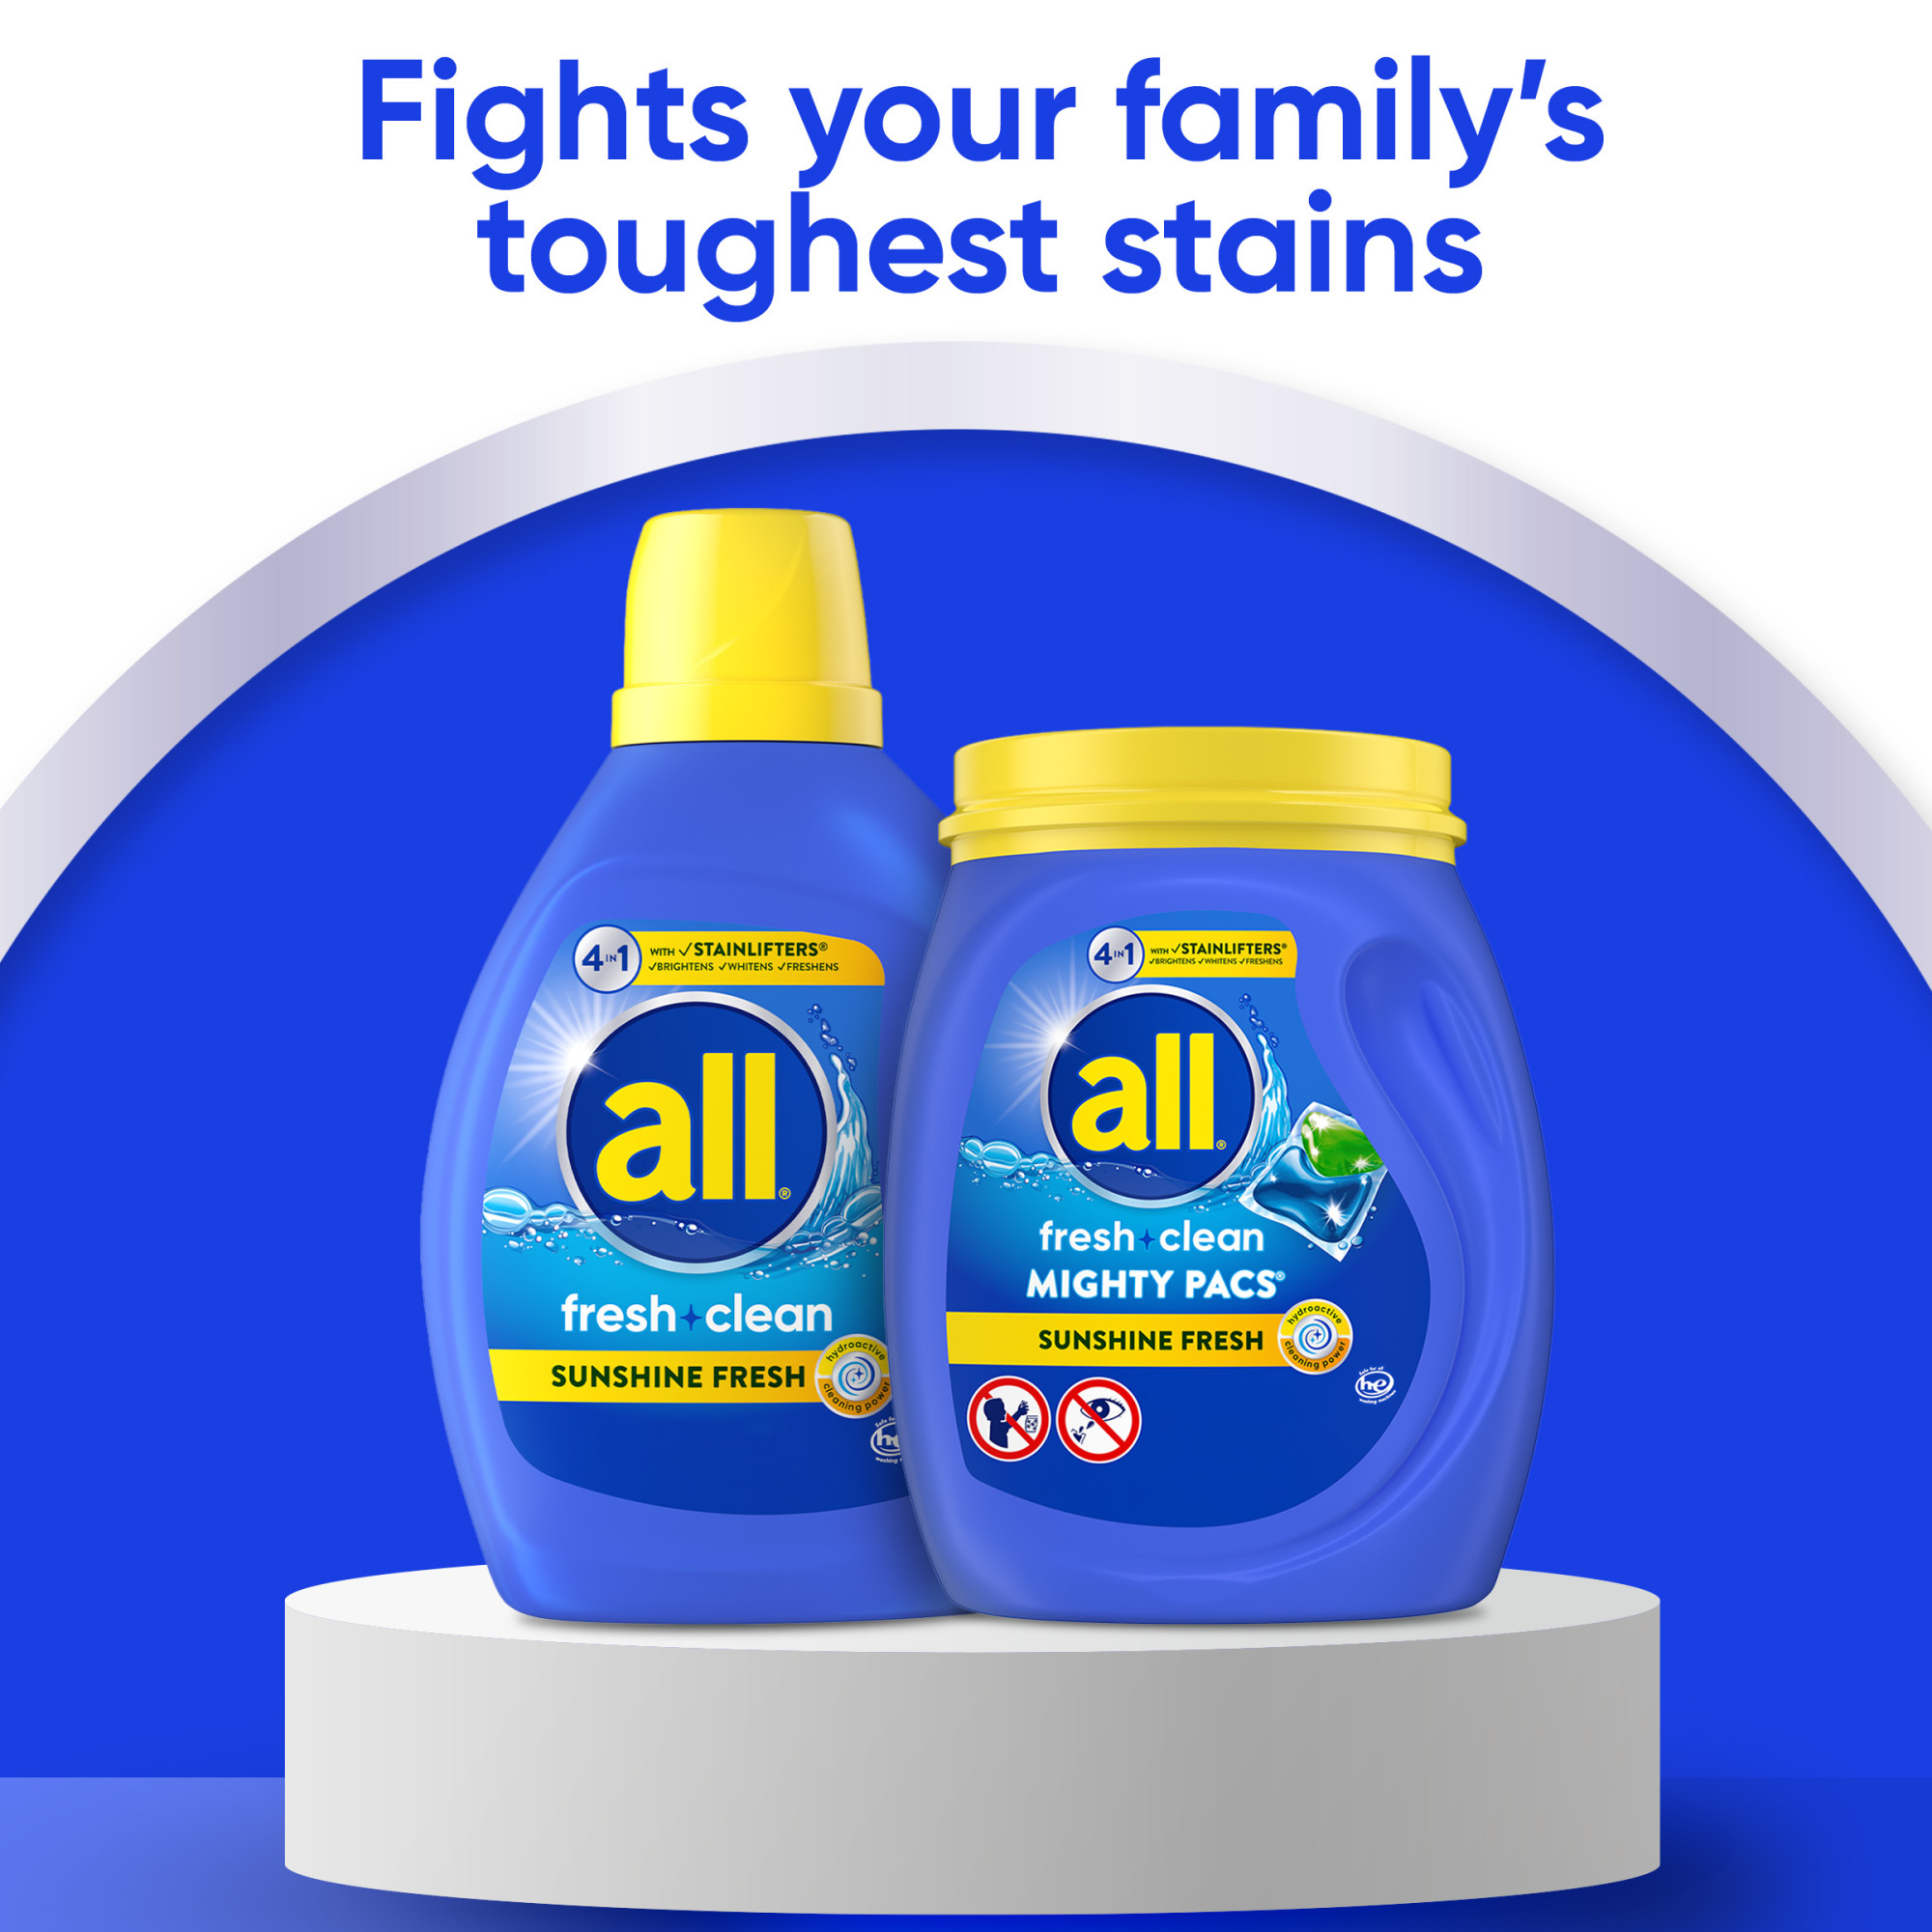 all Mighty Pacs Laundry Detergent Pacs, Fresh Clean 4 in 1 with Stainlifters, Sunshine Fresh, 75 Count - image 4 of 6